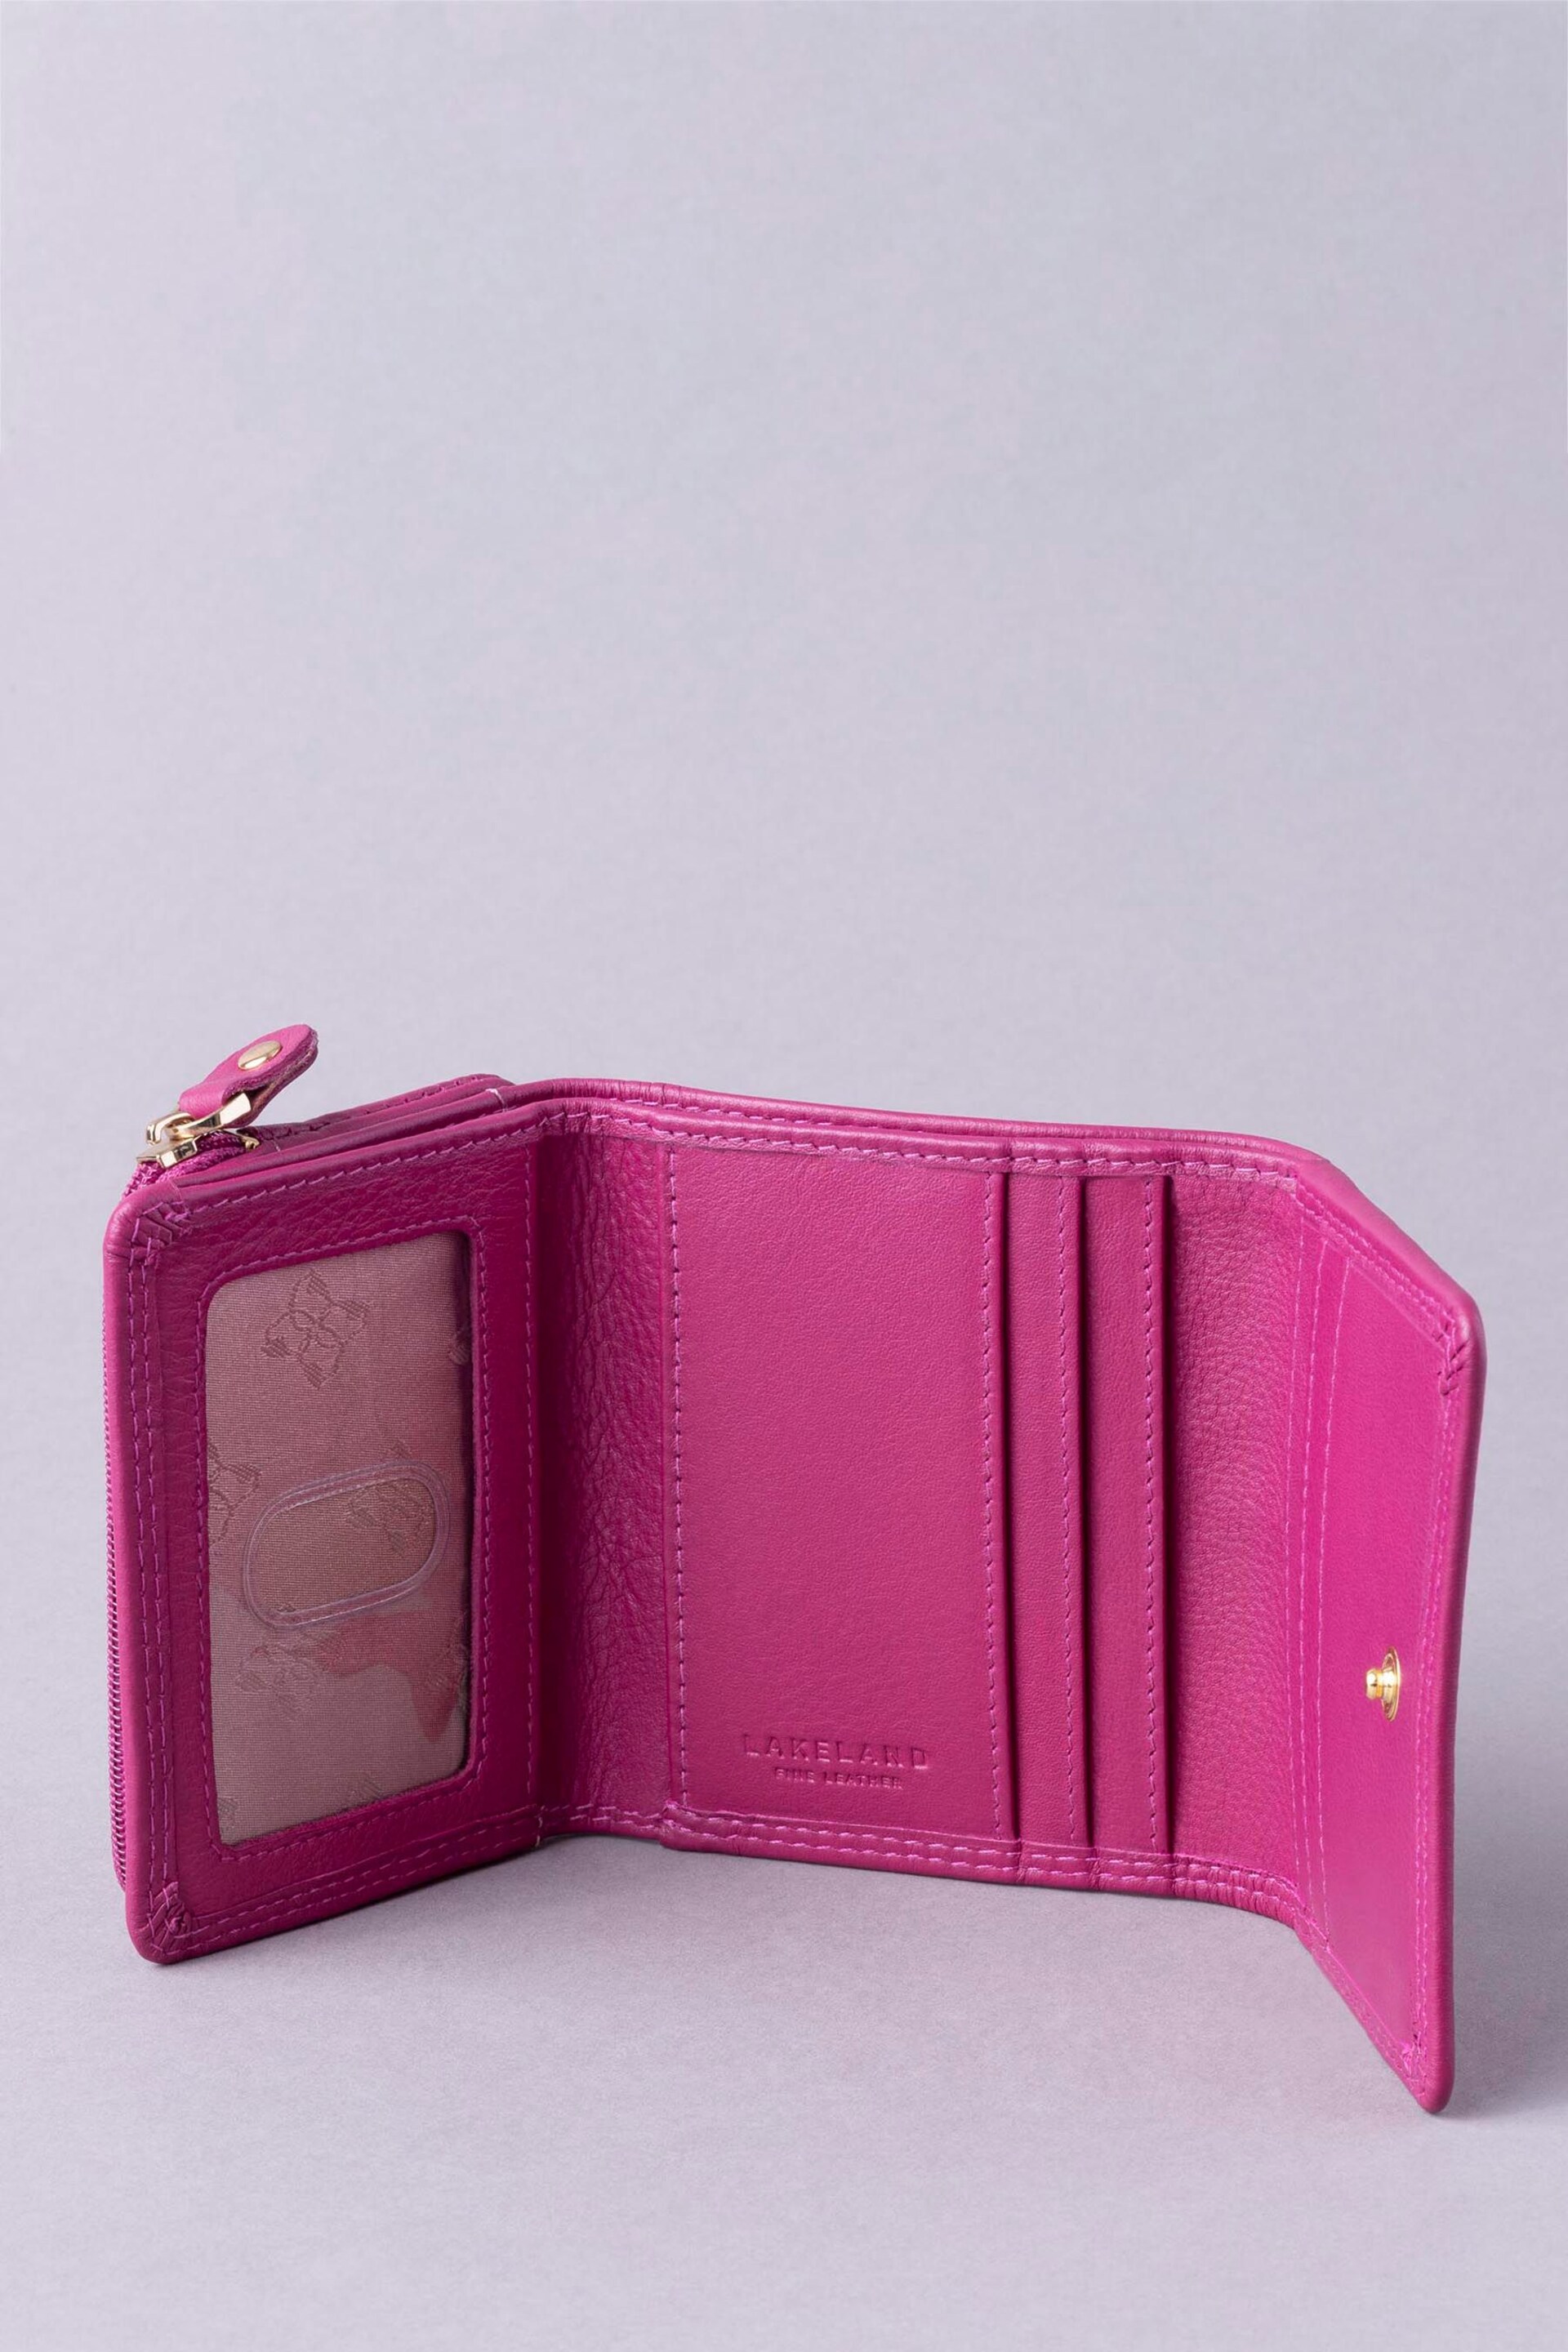 Lakeland Leather Cranberry Small Leather Flapover Purse - Image 3 of 5